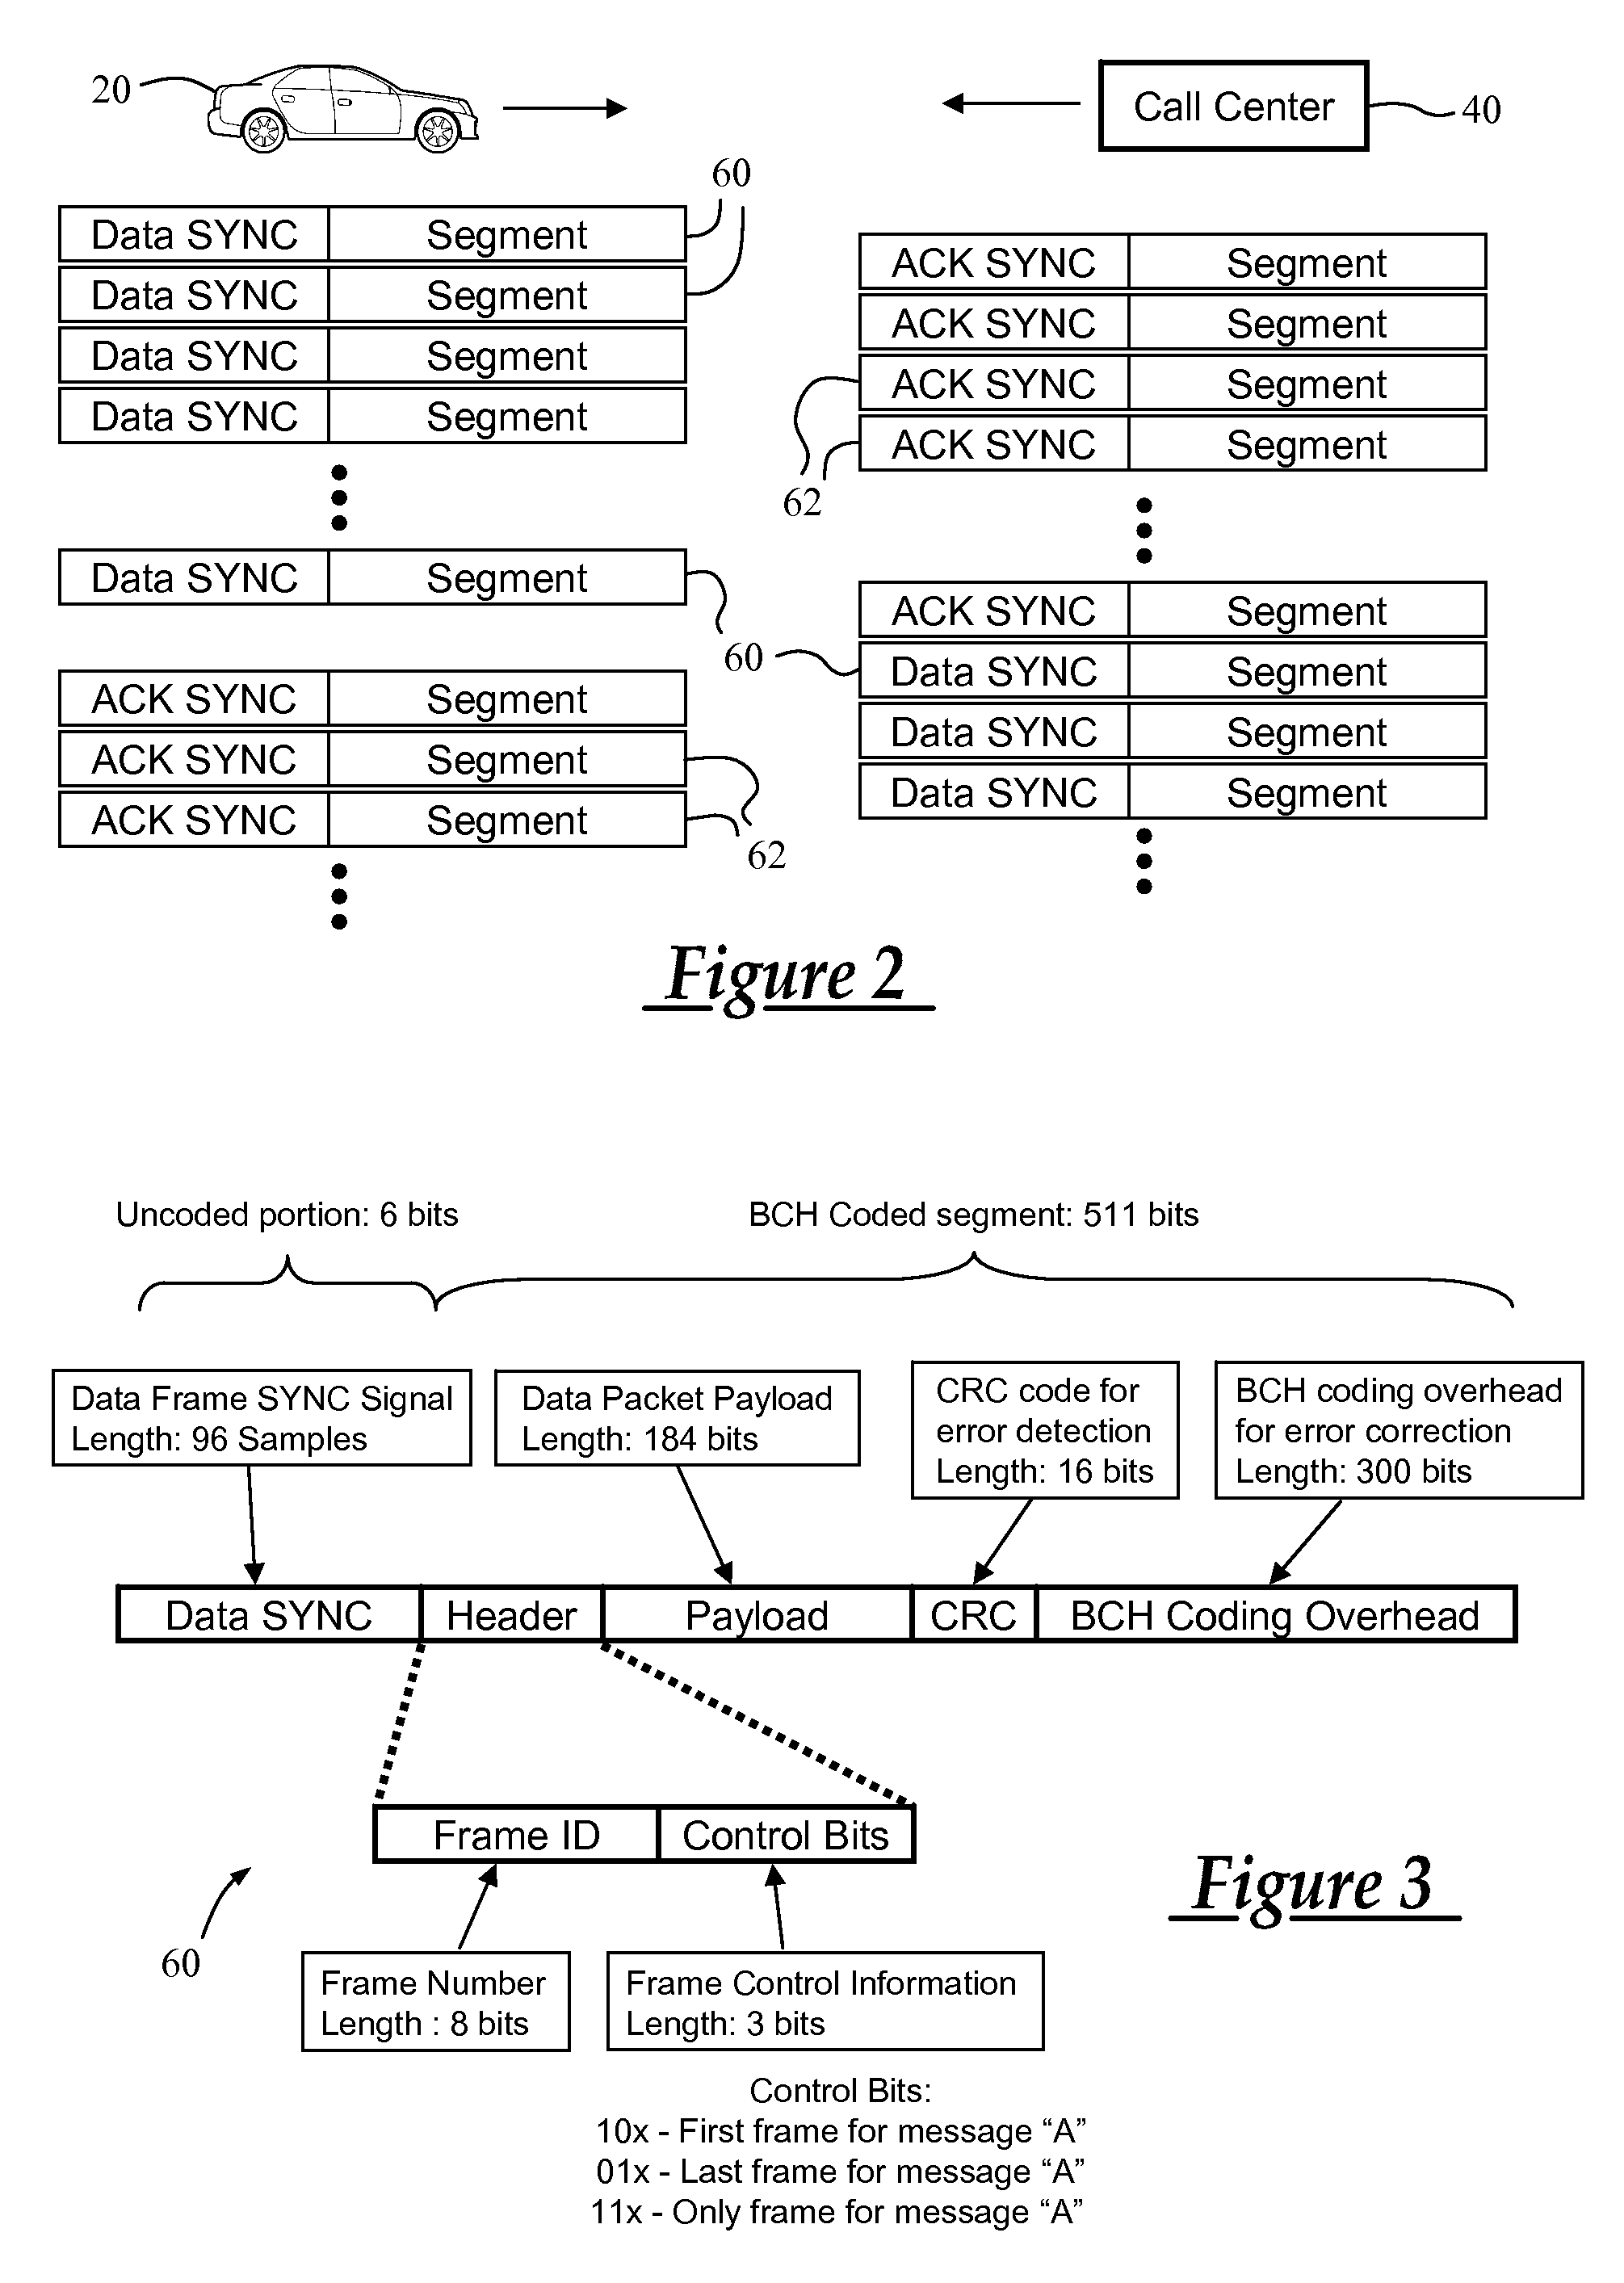 Synchronization and segment type detection method for data transmission via an audio communication system